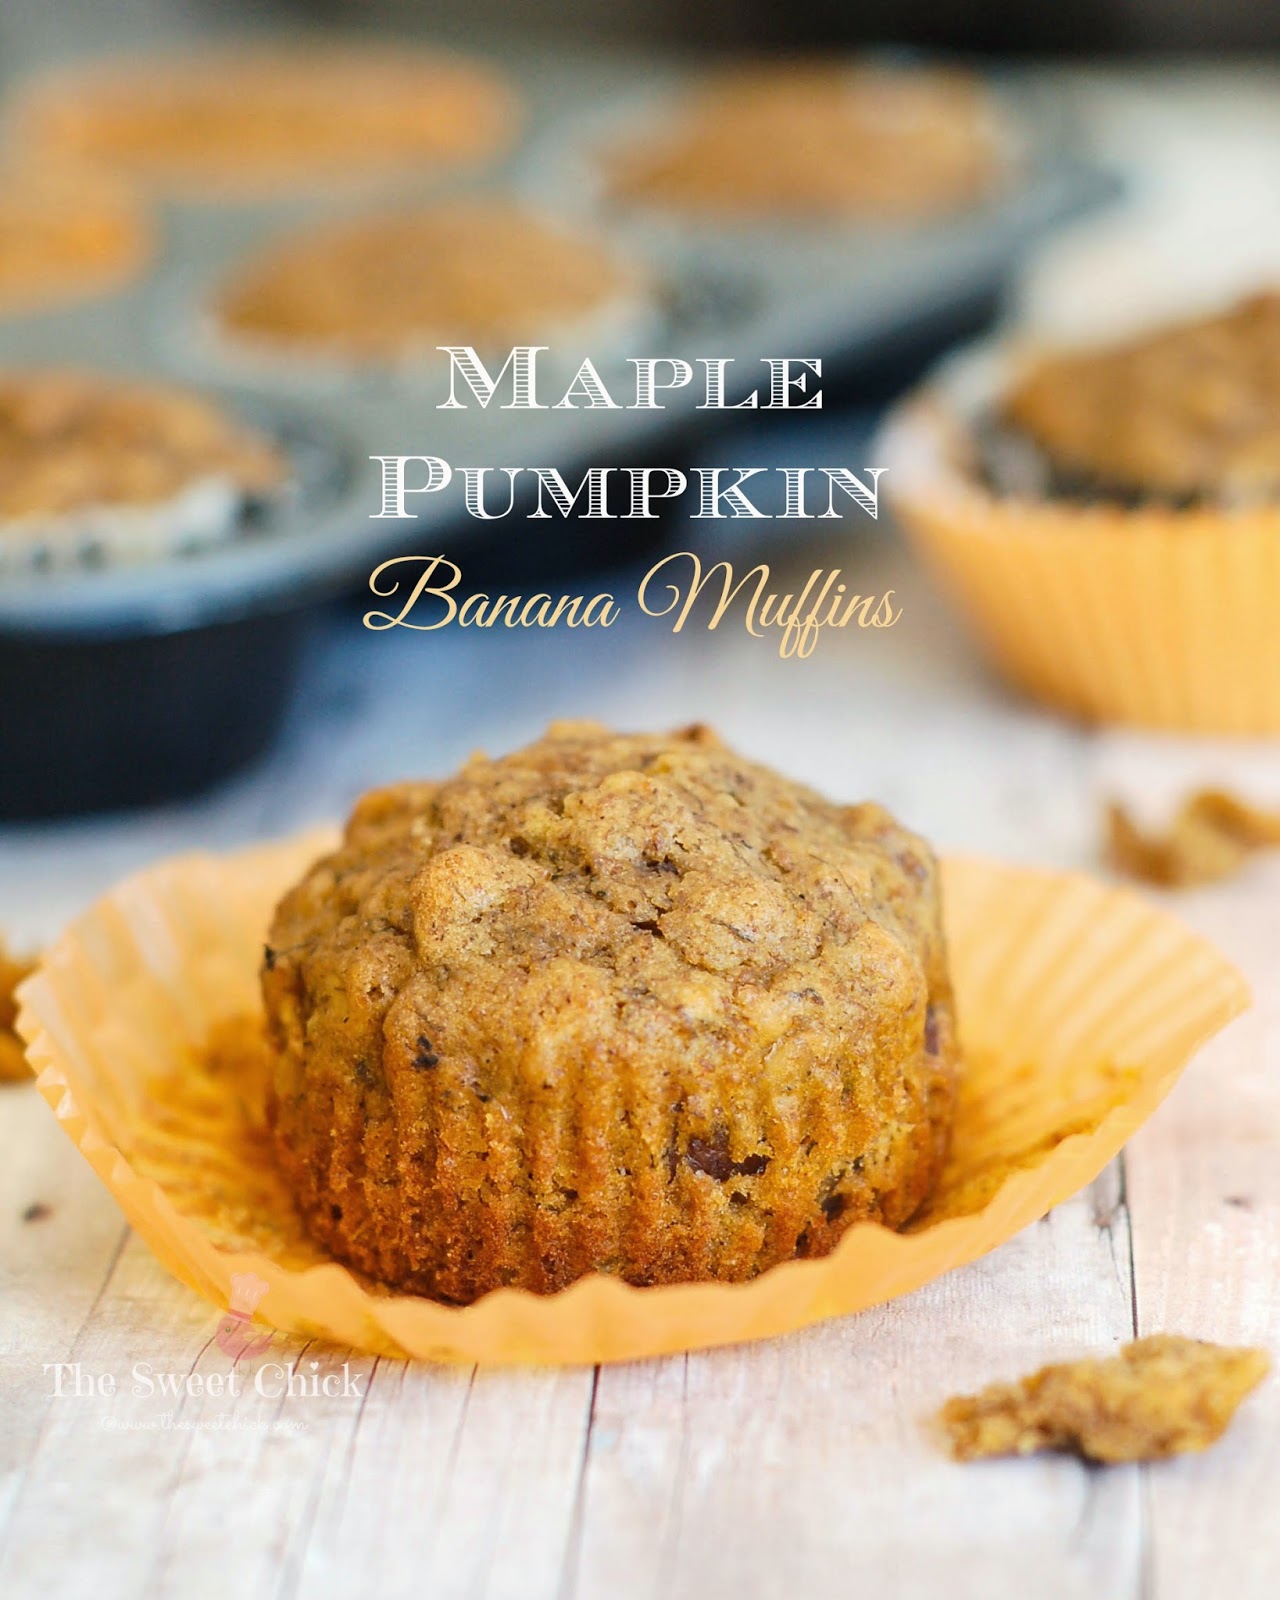 Maple Pumpkin Banana Muffins by The Sweet Chick